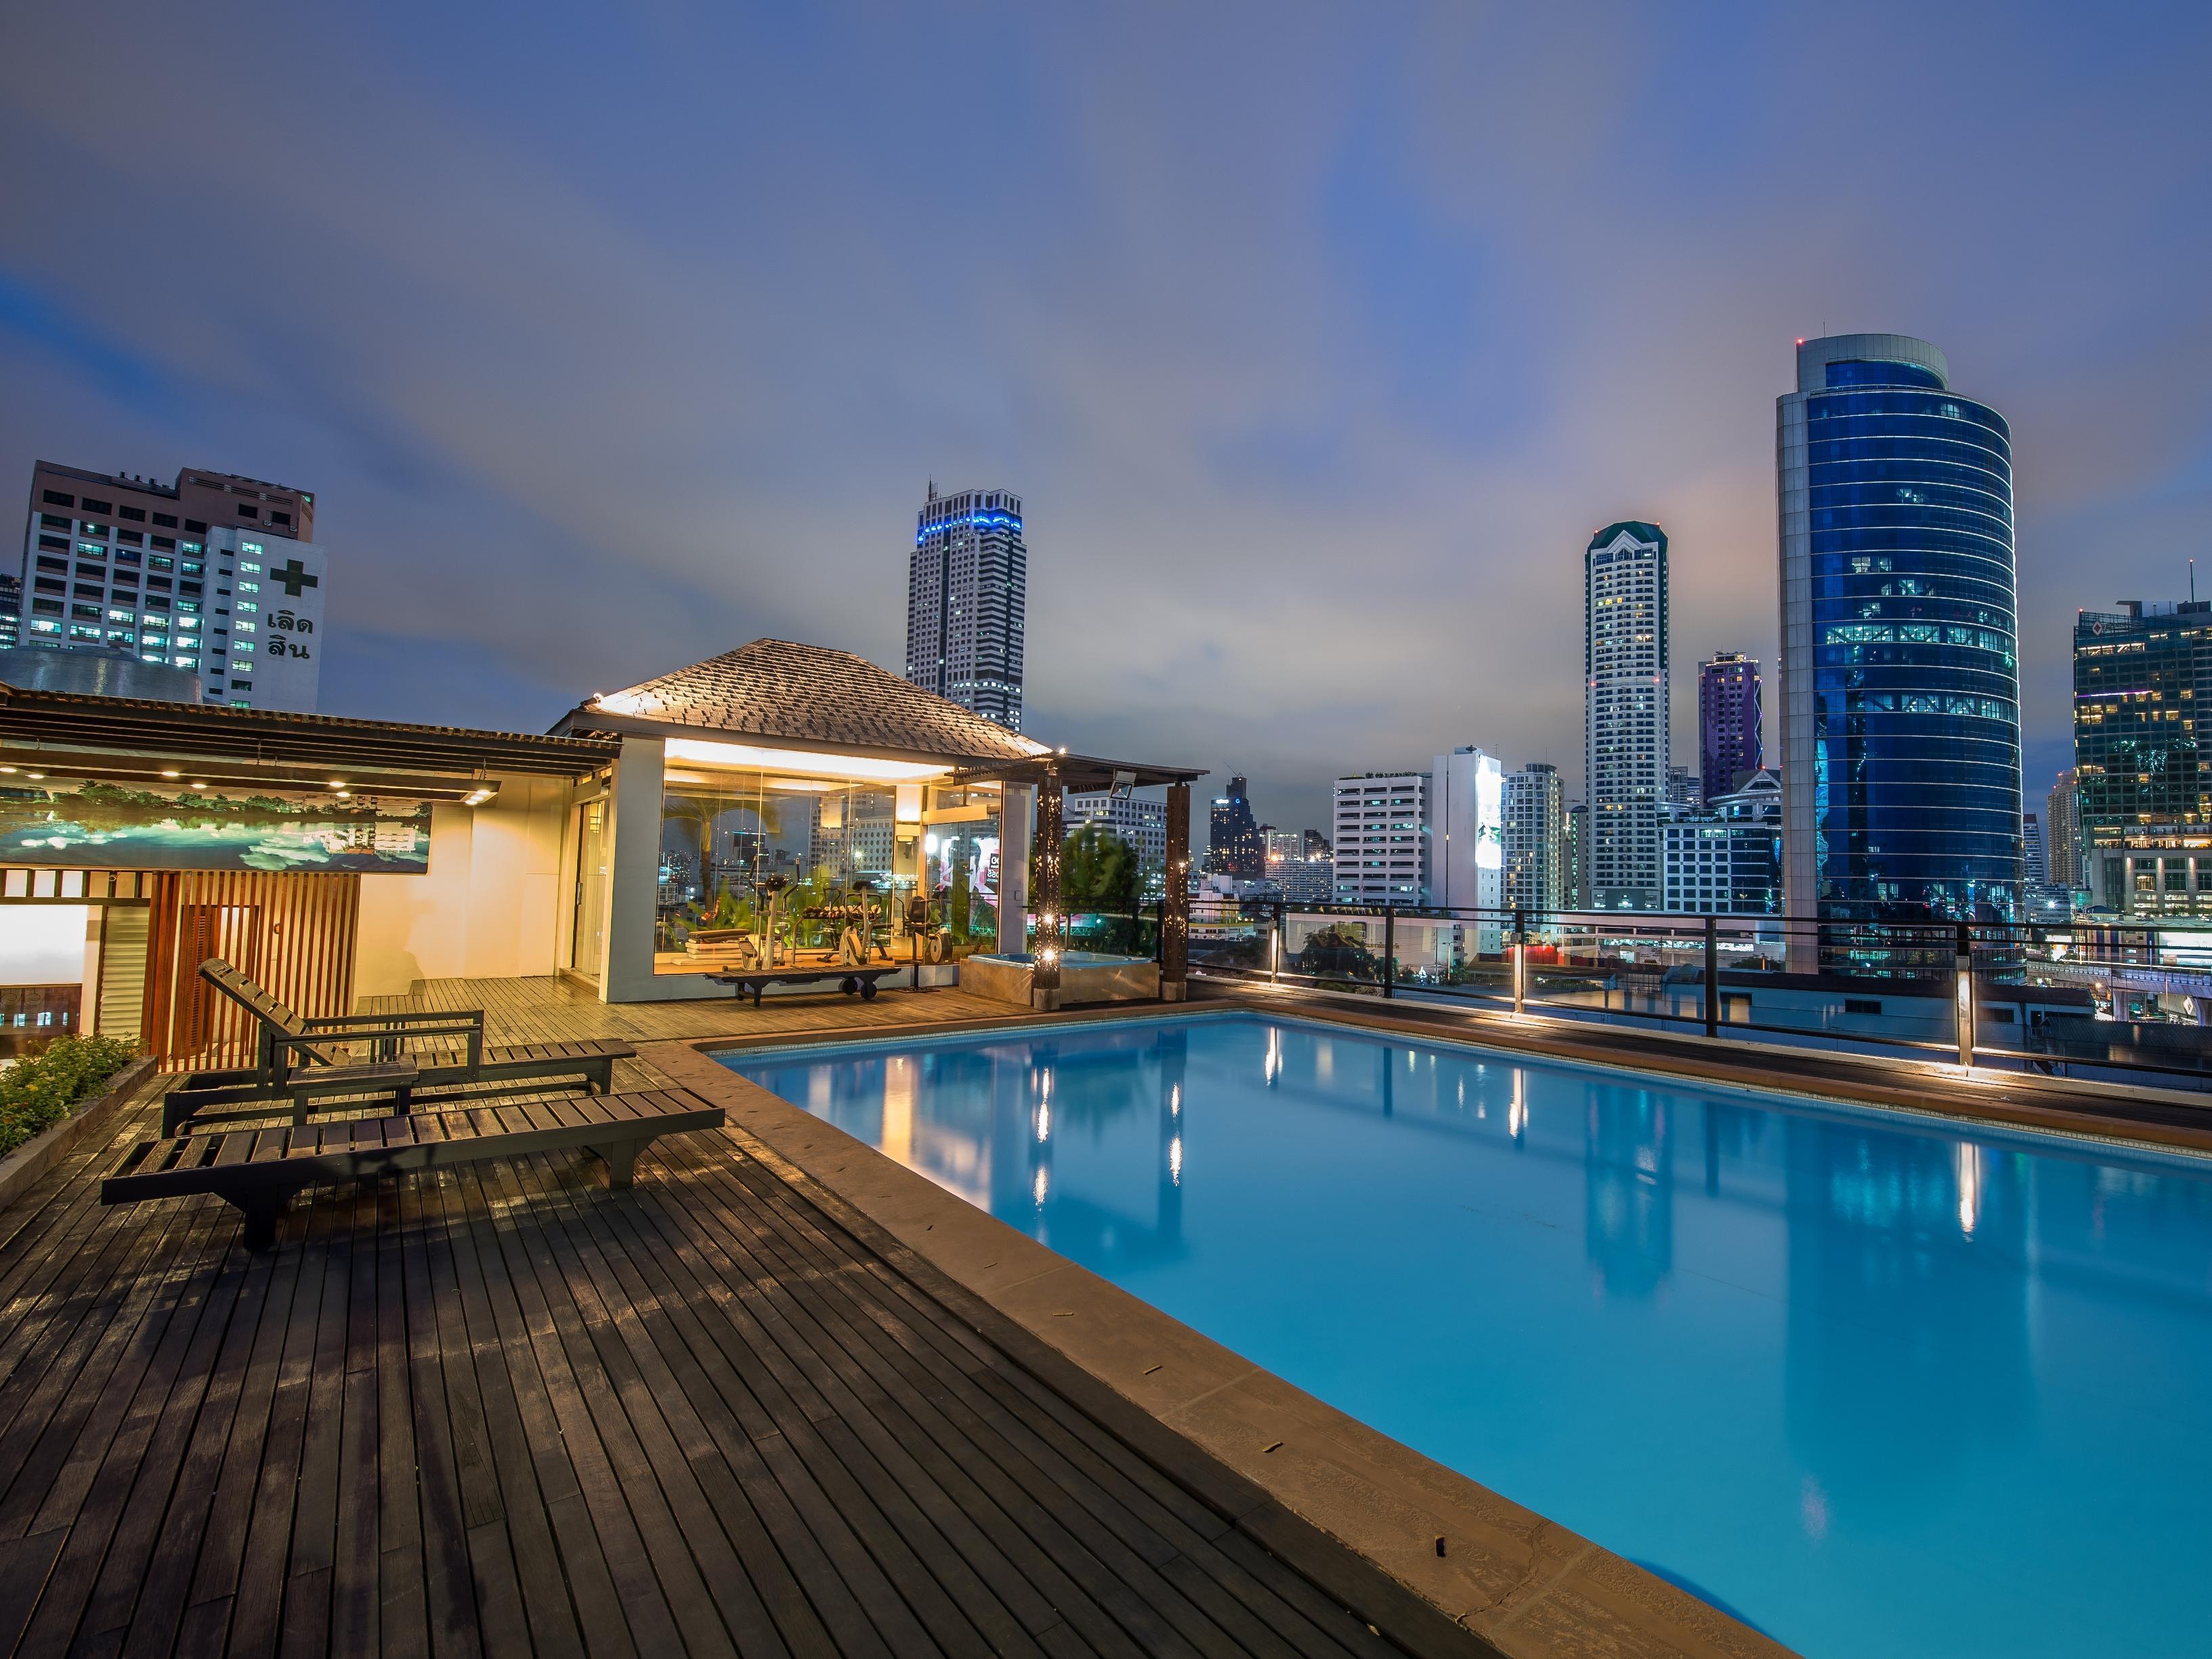 The Grand Sathorn Hotel Thailand FAQ 2016, What facilities are there in The Grand Sathorn Hotel Thailand 2016, What Languages Spoken are Supported in The Grand Sathorn Hotel Thailand 2016, Which payment cards are accepted in The Grand Sathorn Hotel Thailand , Thailand The Grand Sathorn Hotel room facilities and services Q&A 2016, Thailand The Grand Sathorn Hotel online booking services 2016, Thailand The Grand Sathorn Hotel address 2016, Thailand The Grand Sathorn Hotel telephone number 2016,Thailand The Grand Sathorn Hotel map 2016, Thailand The Grand Sathorn Hotel traffic guide 2016, how to go Thailand The Grand Sathorn Hotel, Thailand The Grand Sathorn Hotel booking online 2016, Thailand The Grand Sathorn Hotel room types 2016.